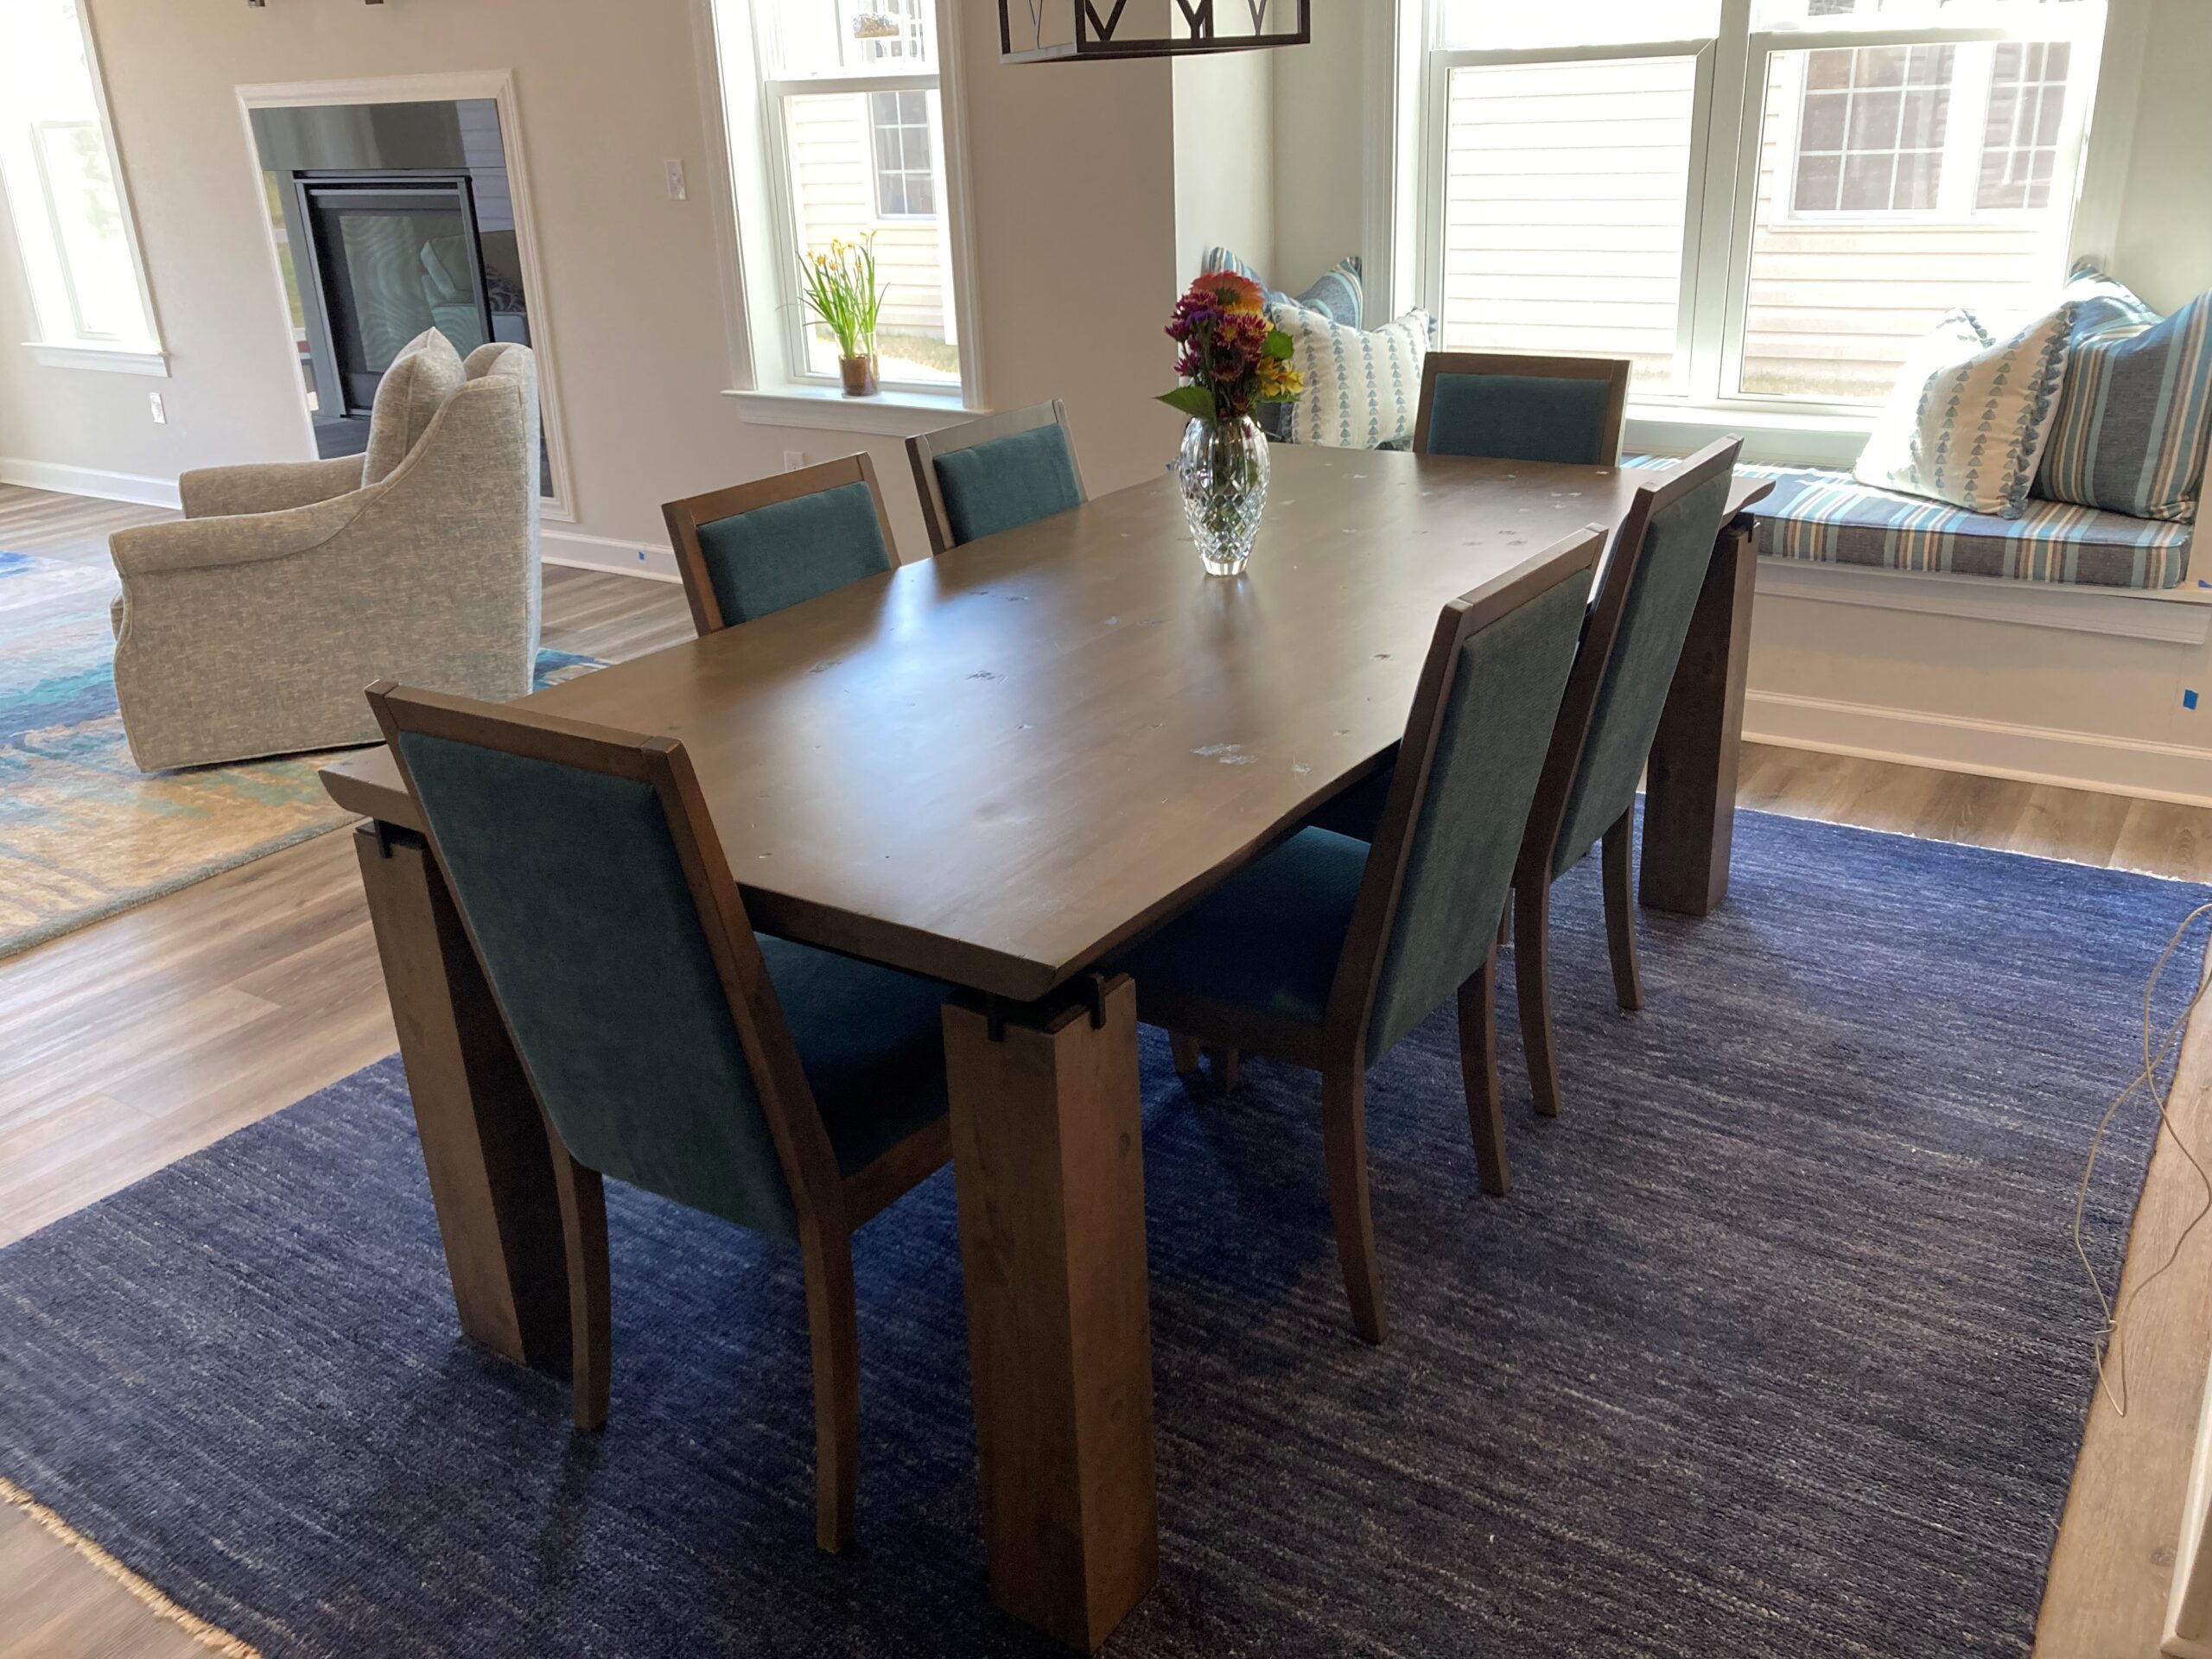 a dining room table with blue chairs and a rug on the floor